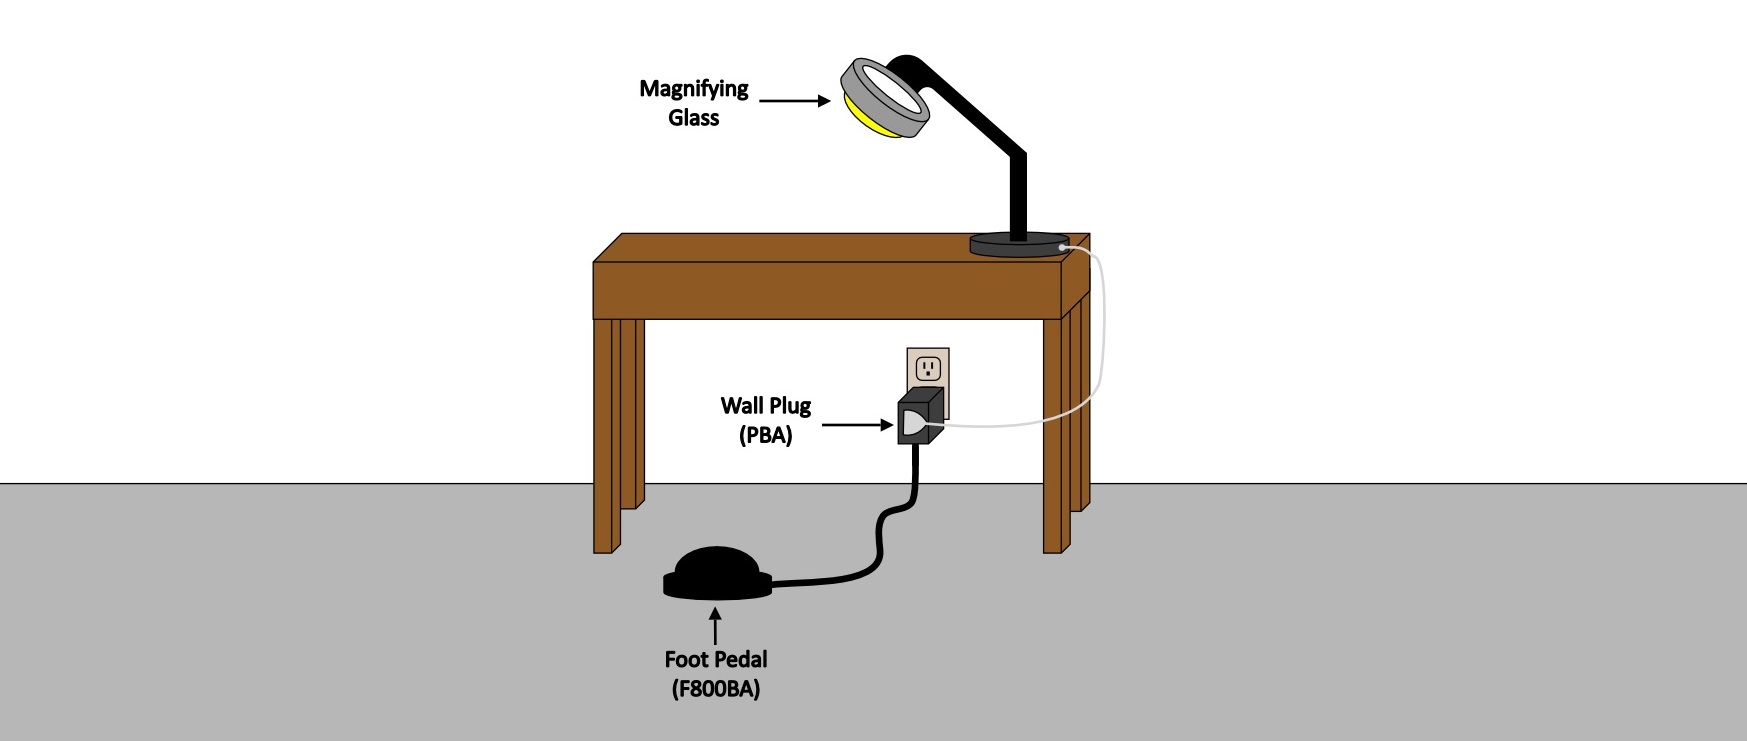 Magnifying glass foot pedal power switch